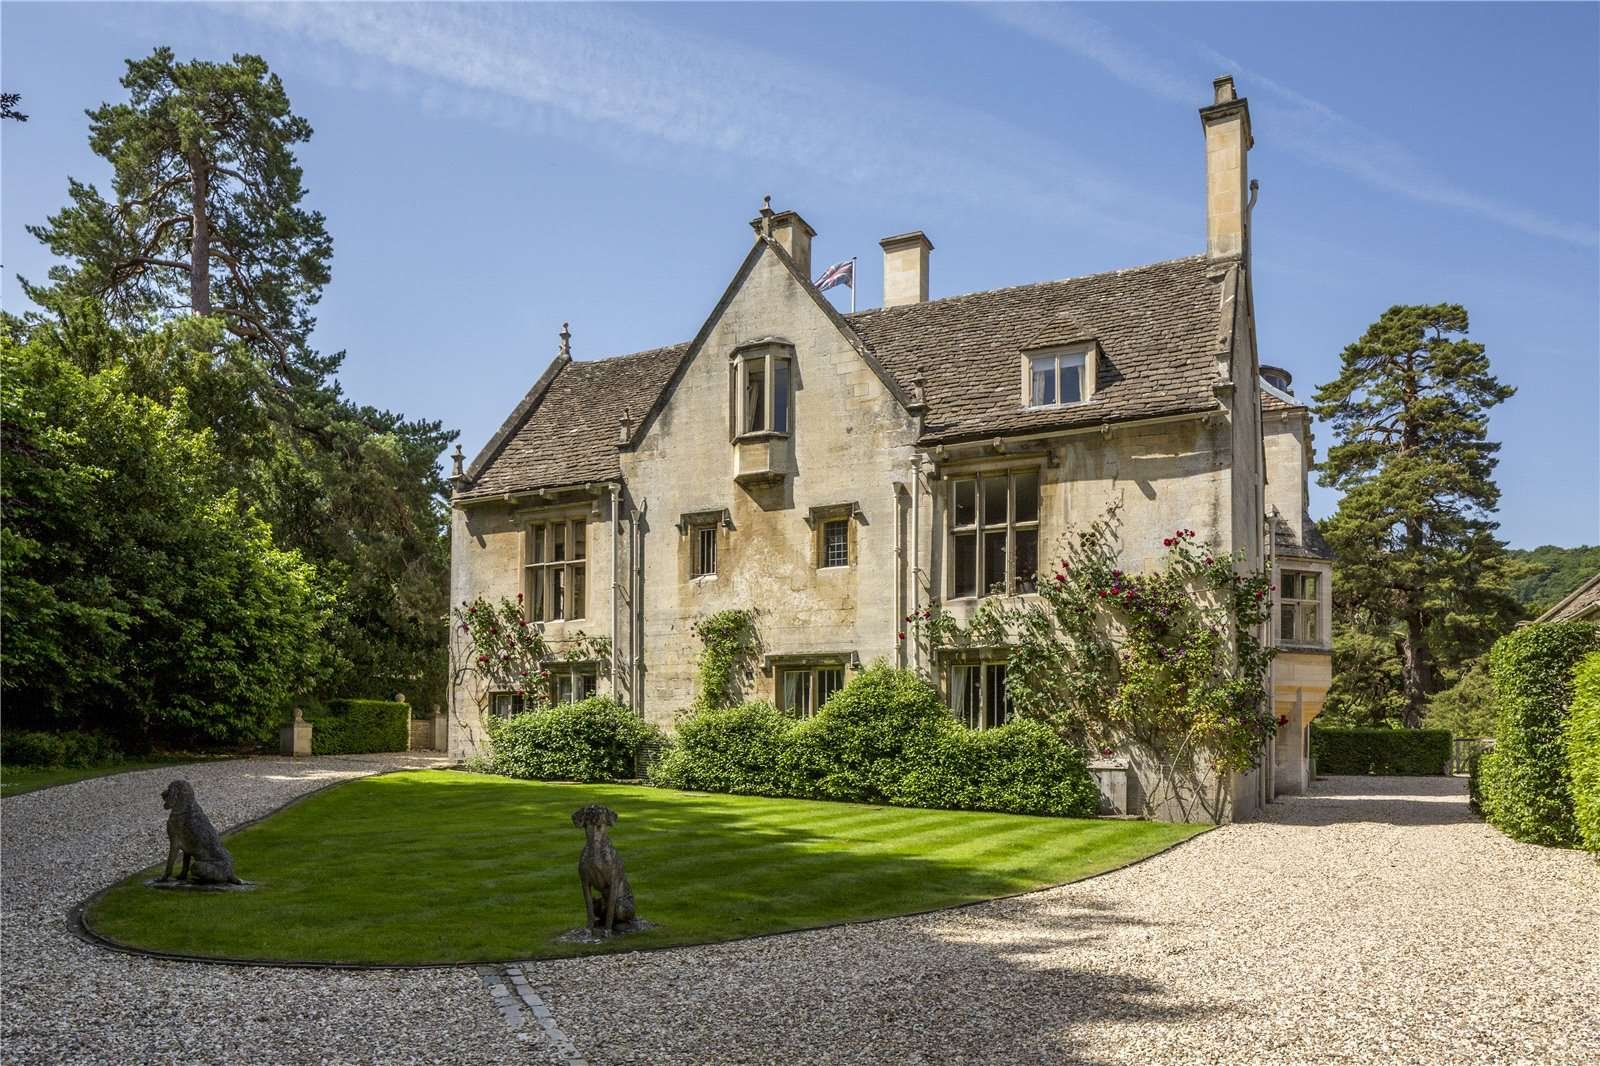 Francis York TCotswolds House Built on the  Site of an Ancient Roman Villa  Savills Bluebook Agency 9.jpg